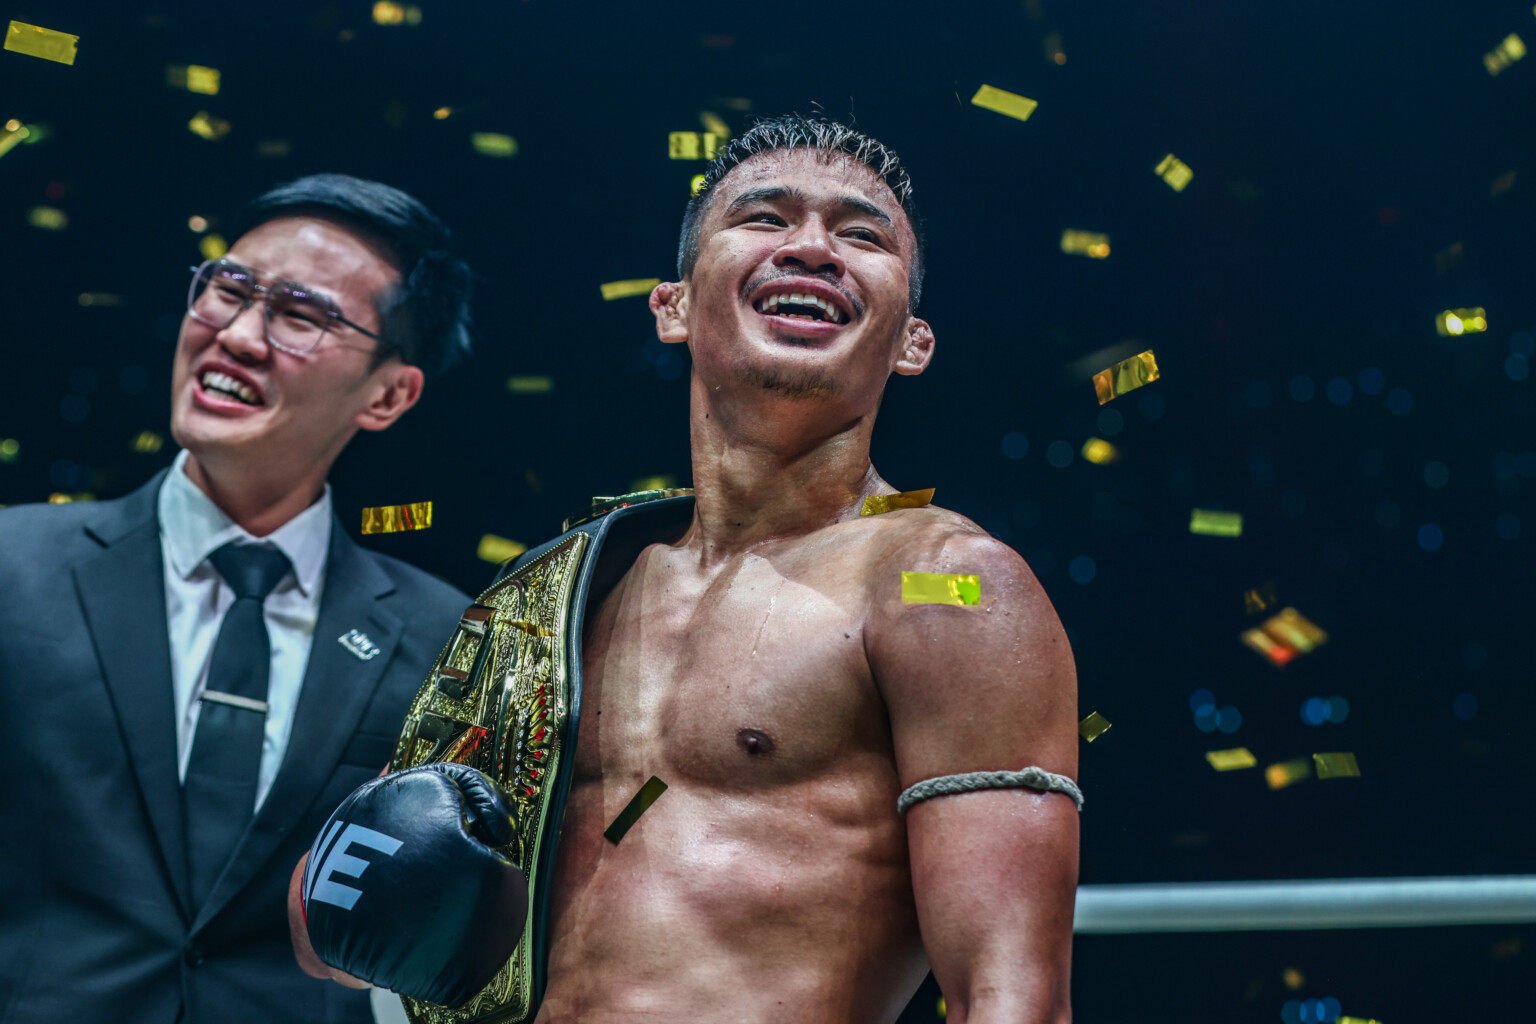 Superlek Kiatmoo9 will face Kongthoranee Sor Sommai at ONE 167 and then Jonathan Haggerty at ONE 168. Photo: ONE Championship